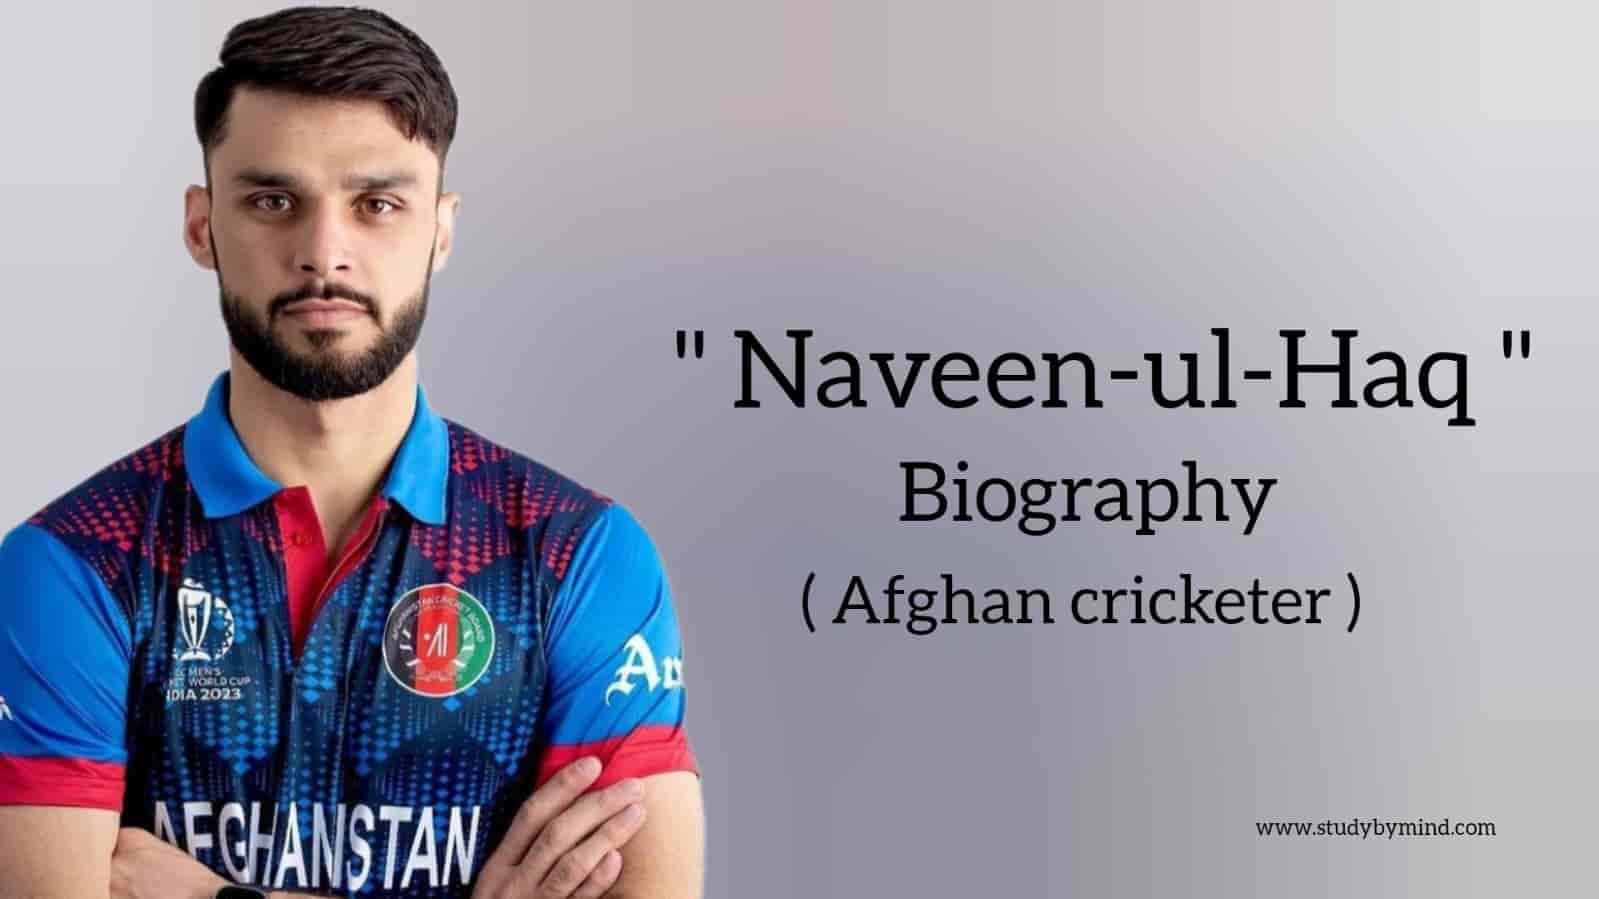 You are currently viewing Naveen-ul-Haq biography in english (Afghan cricketer)